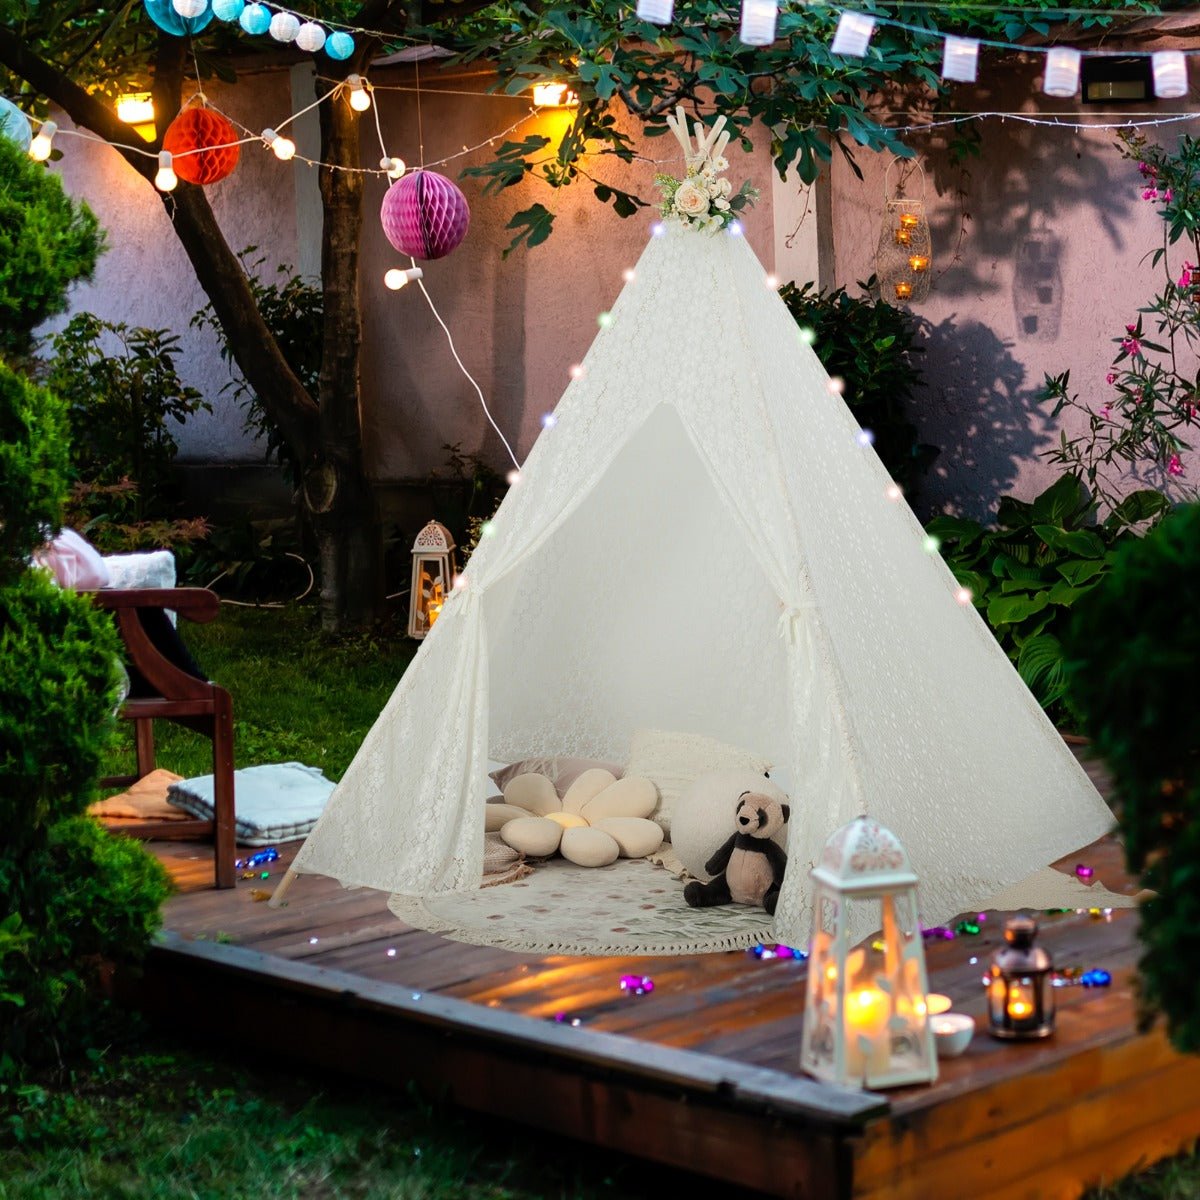 Play and Relax: 5-Side Lace Teepee Tent with colourful Lights for Everyone